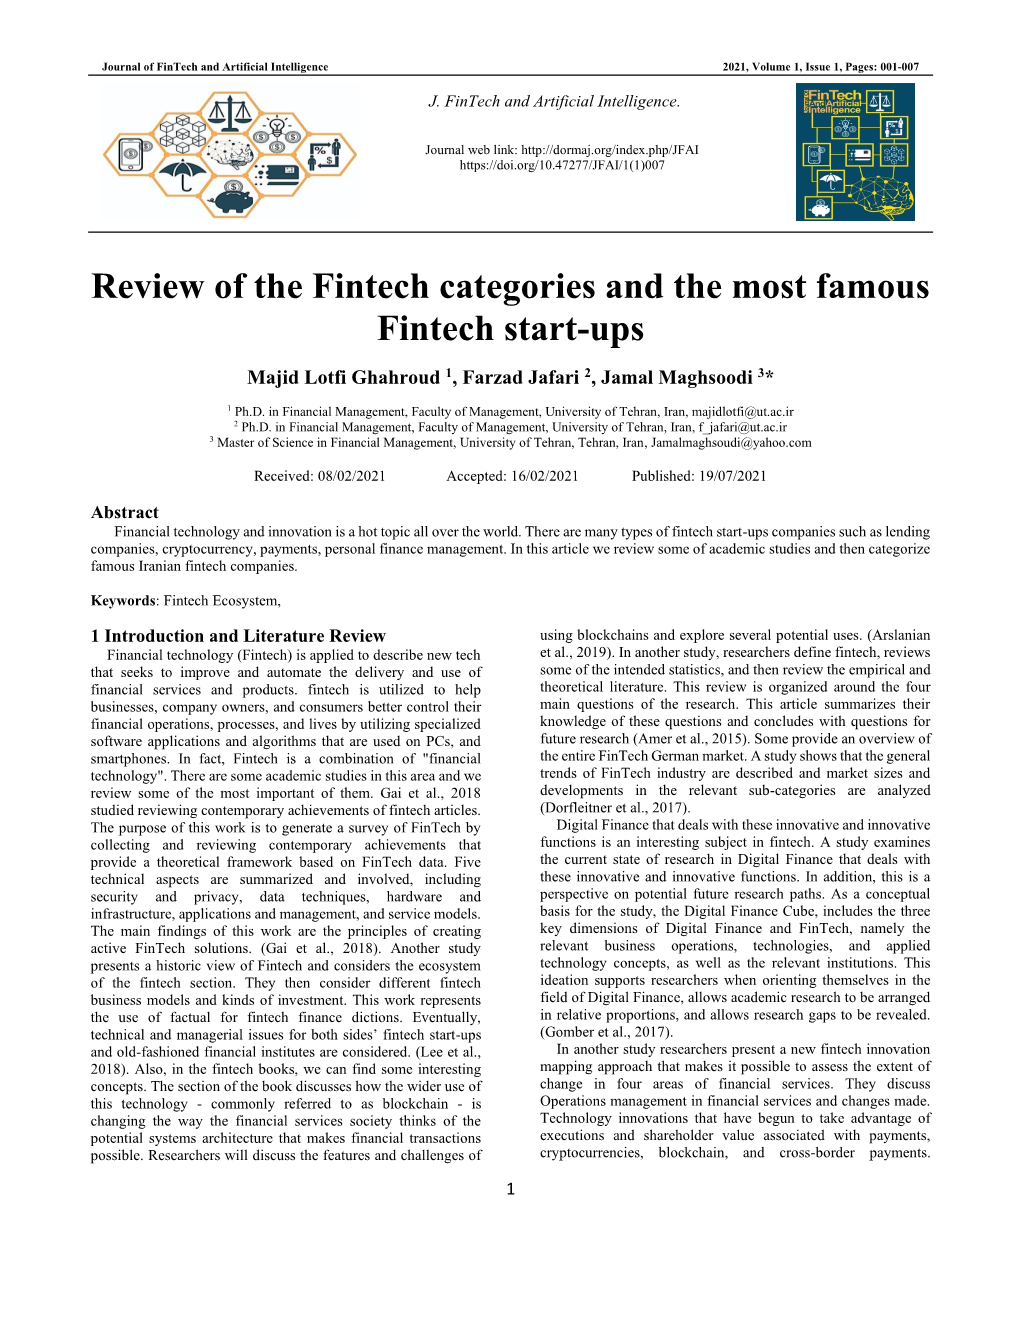 Review of the Fintech Categories and the Most Famous Fintech Start-Ups